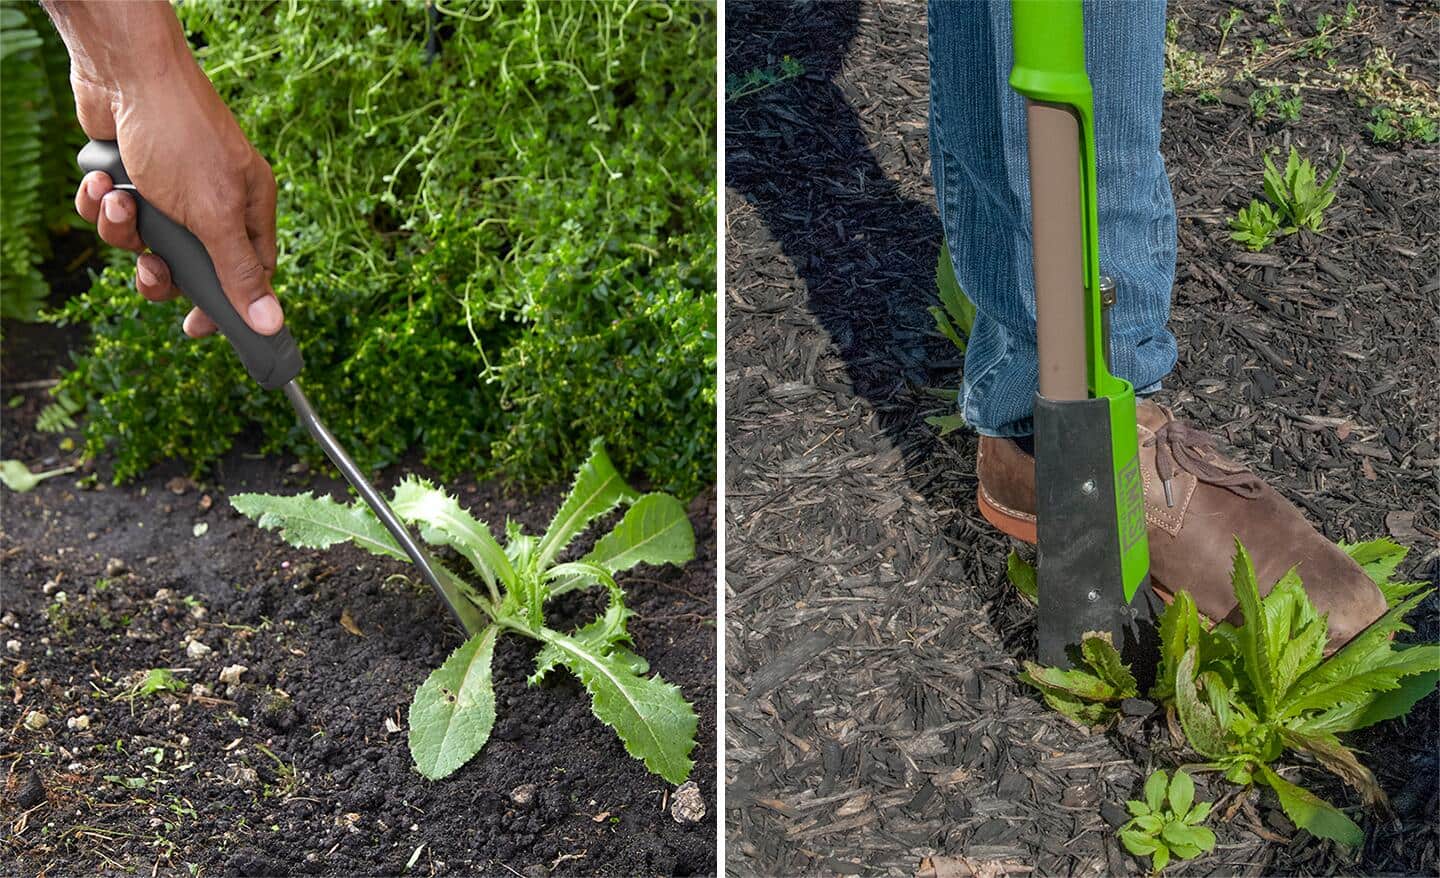 Person on the left uses a hand weeding tool and person on the right uses a stand up weeding tool